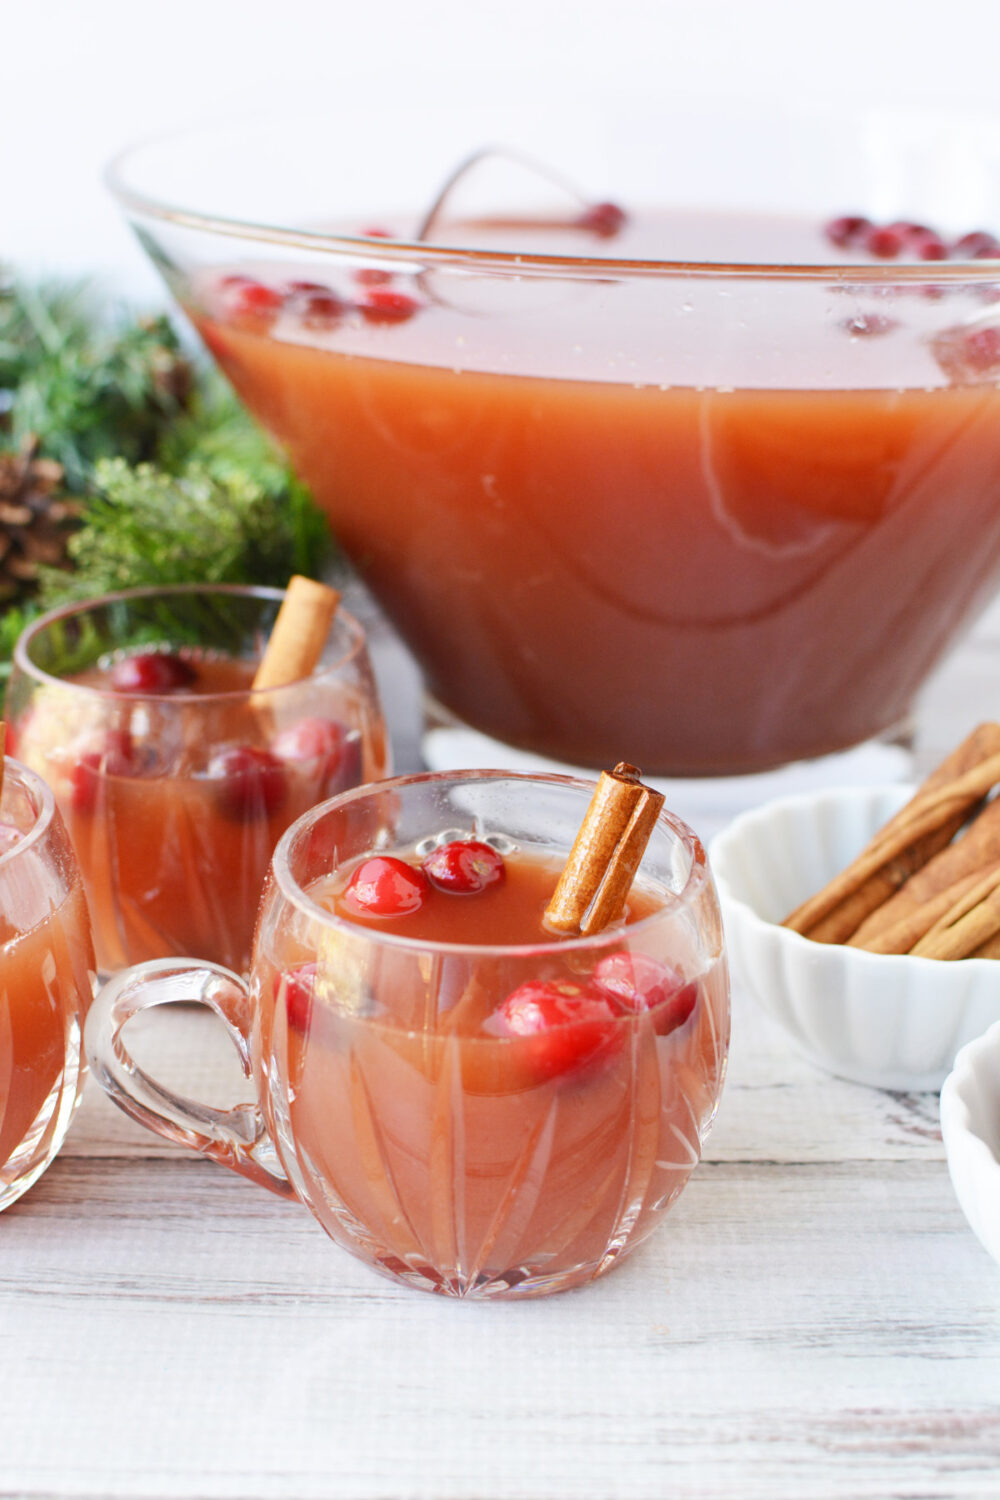 Mugs of punch with cranberries and cinnamon sticks next to the bowl of punch. 